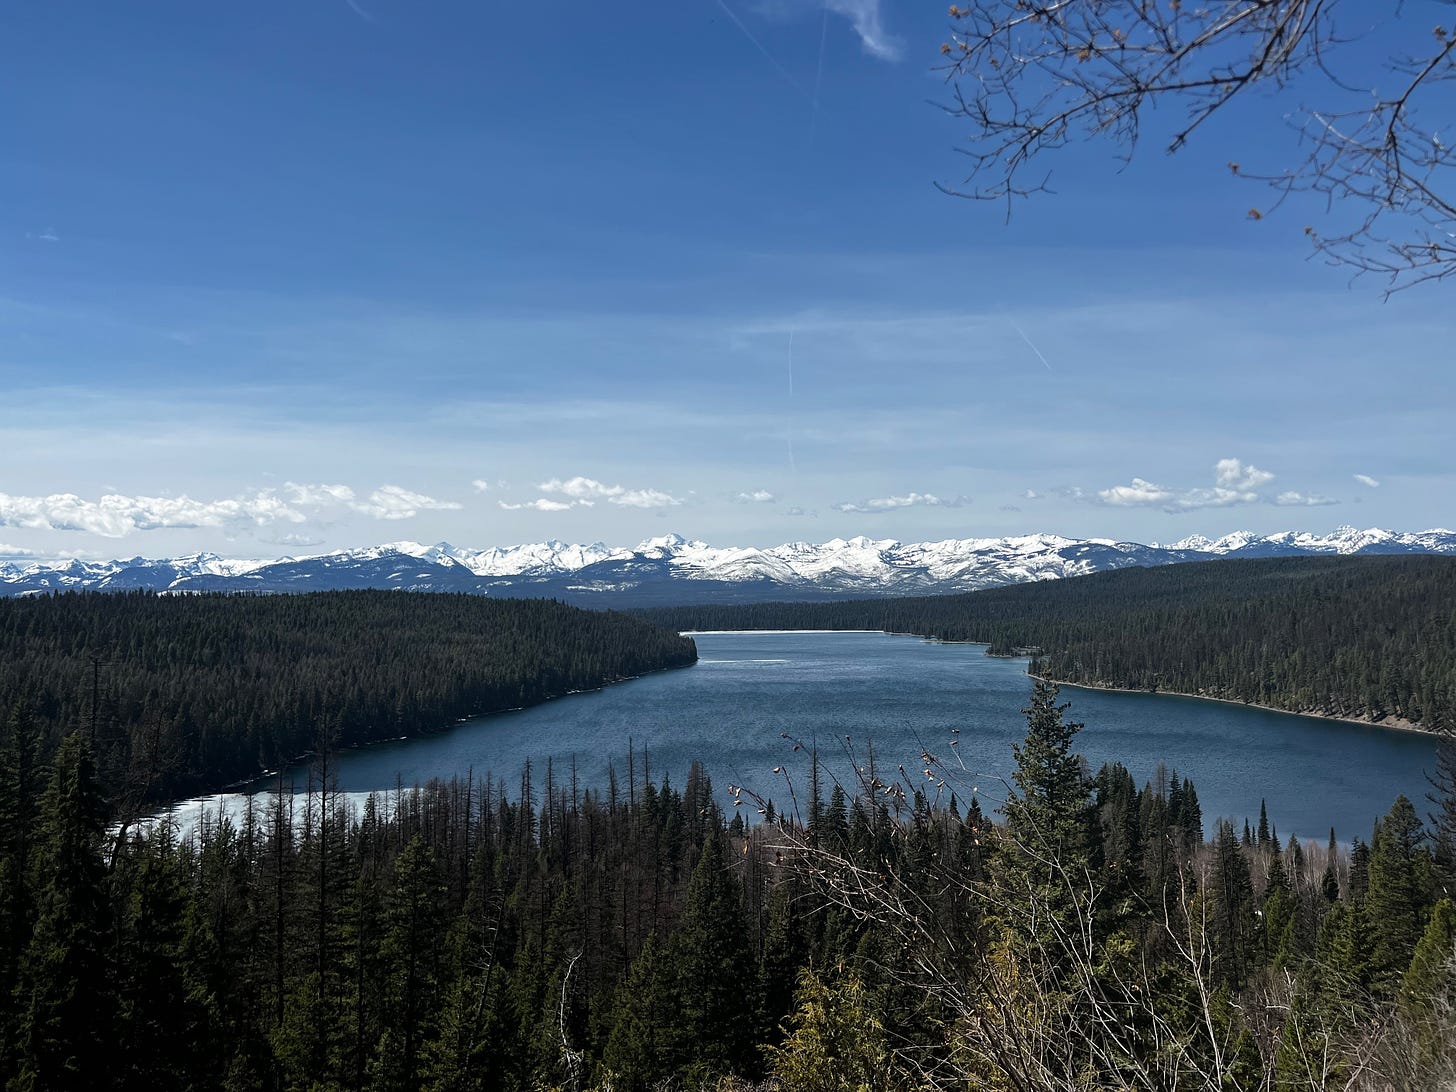 Mostly blue sky over snow-capped mountains on the far horizon, with a lake surrounded by evergreen forest in the foreground.